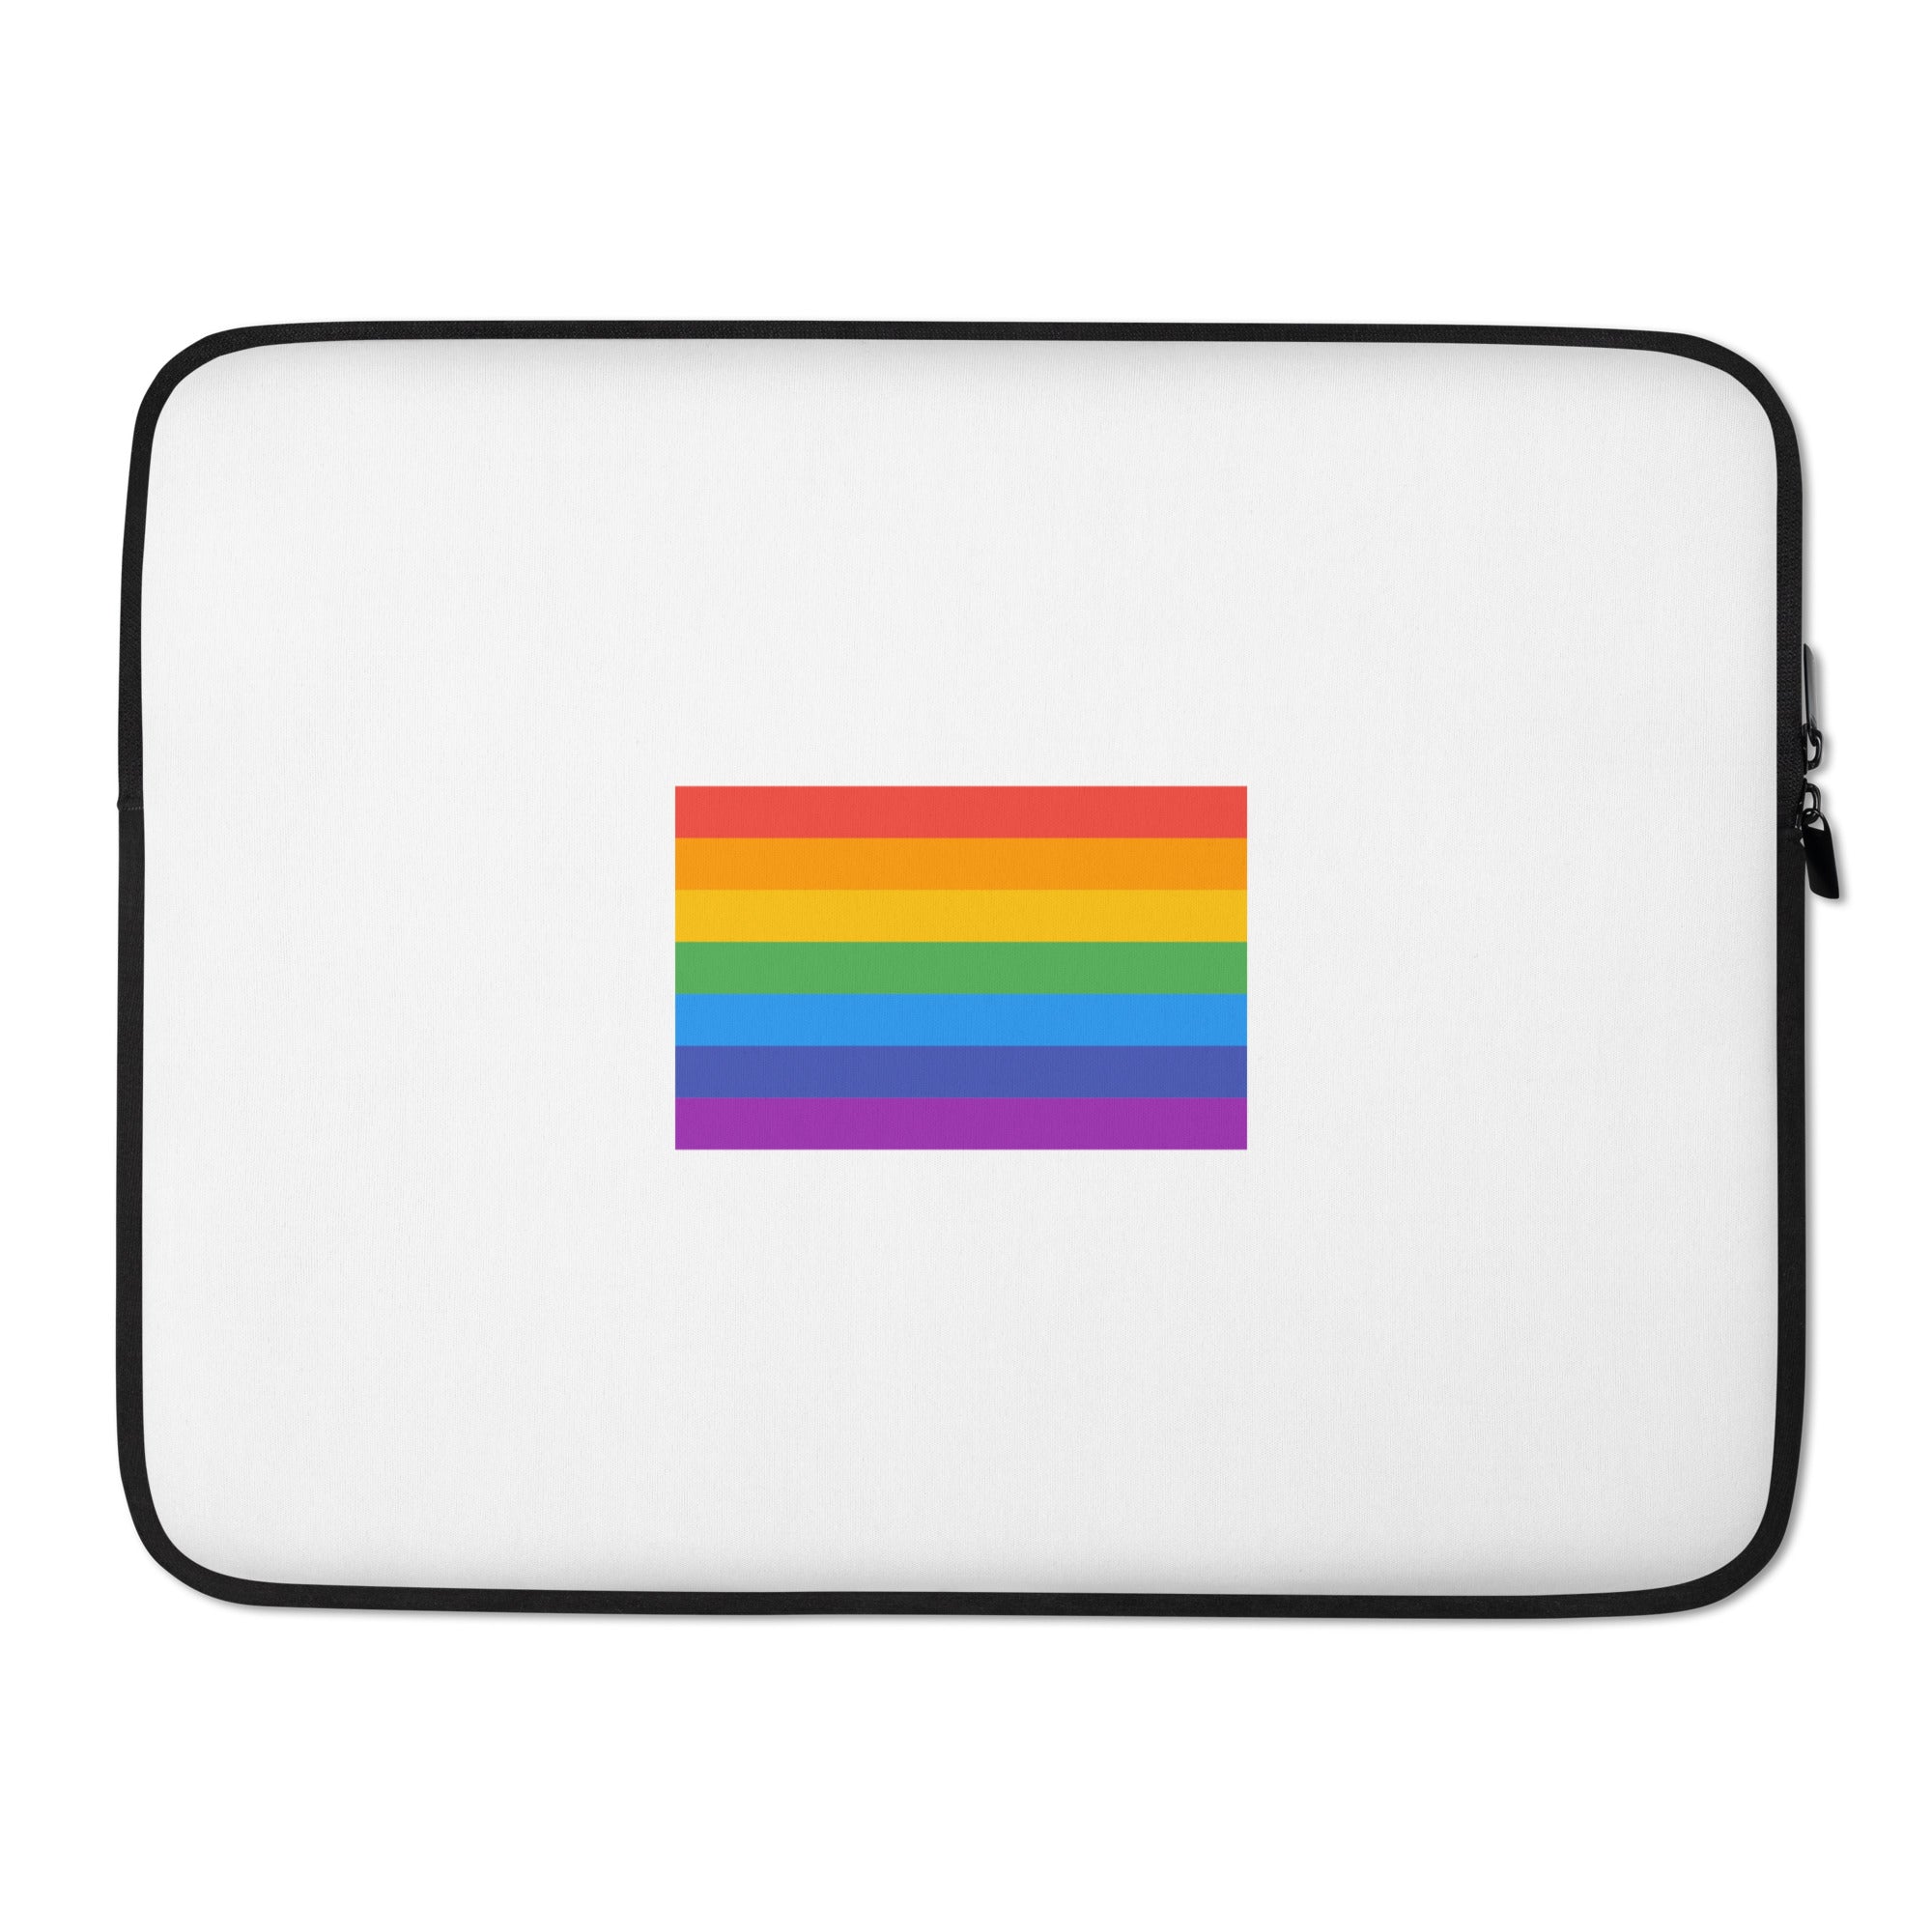 Be Proud Of Being You - Laptop Sleeve